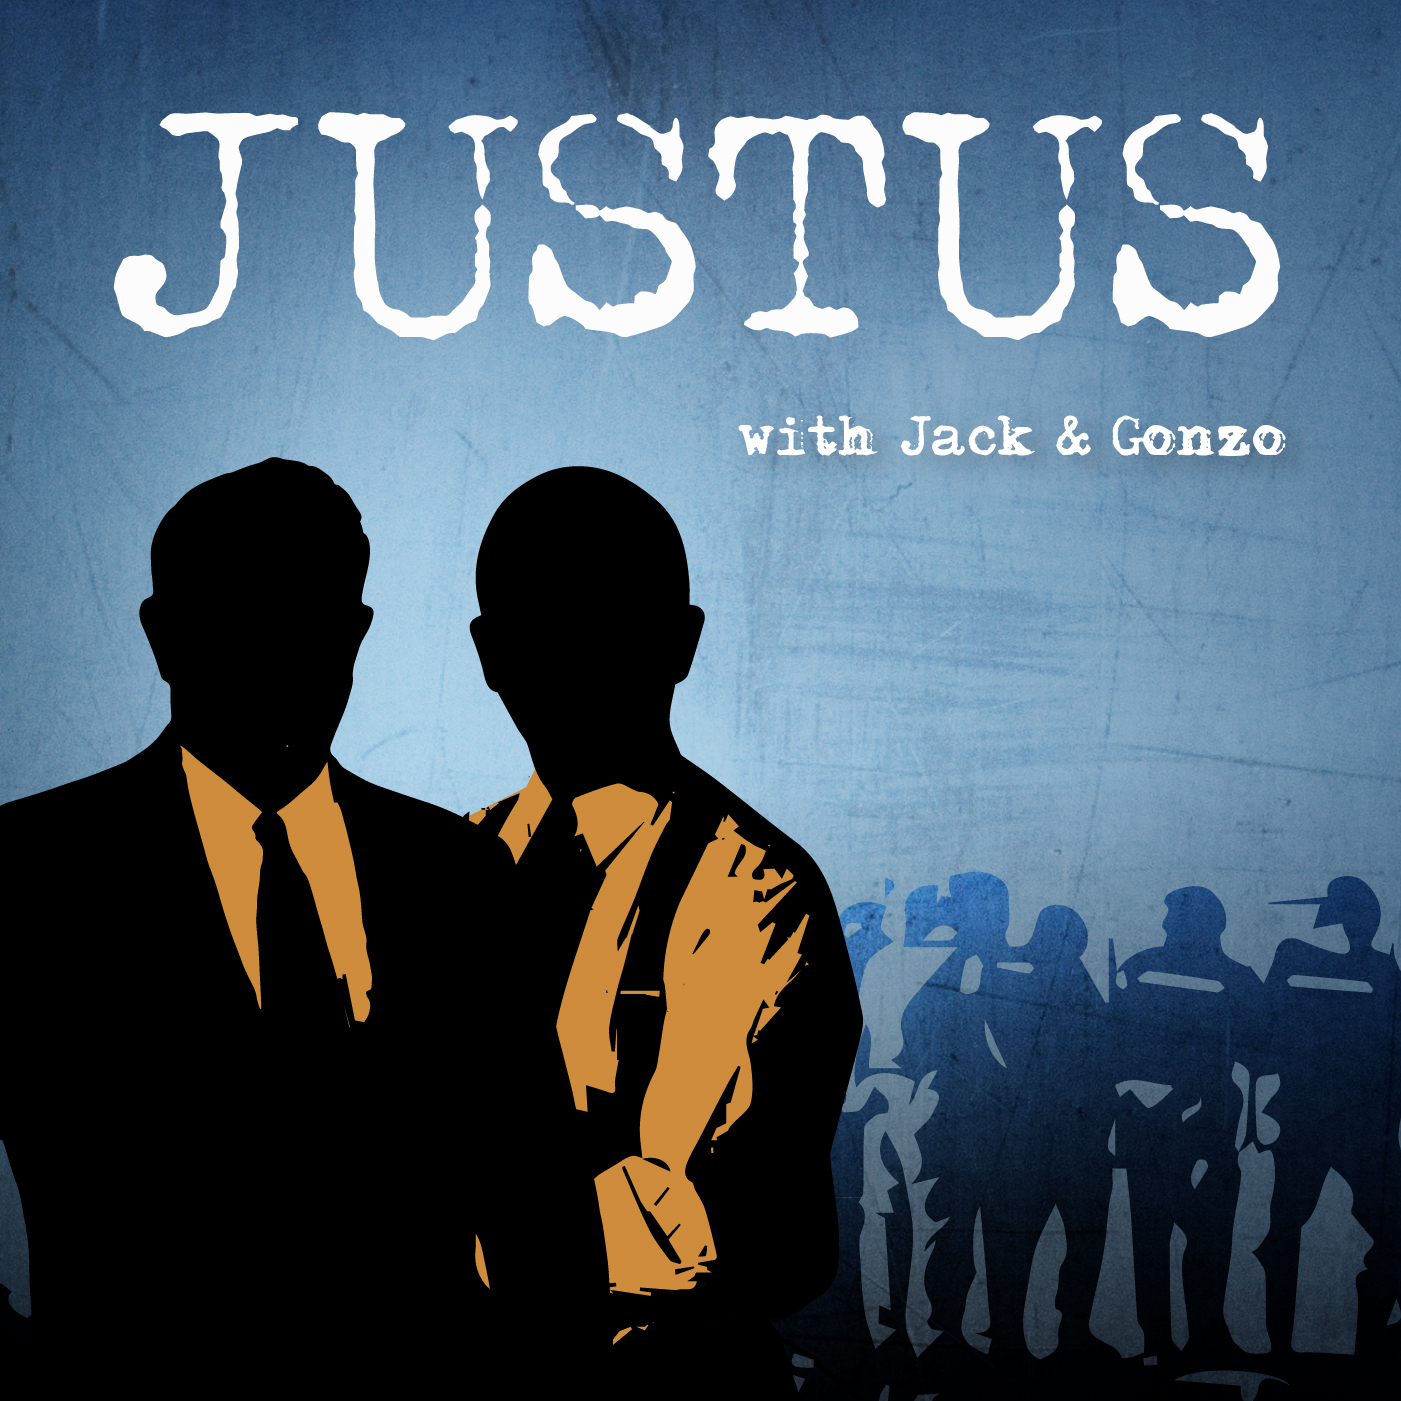 Artwork for podcast JUSTUS with Jack & Gonzo